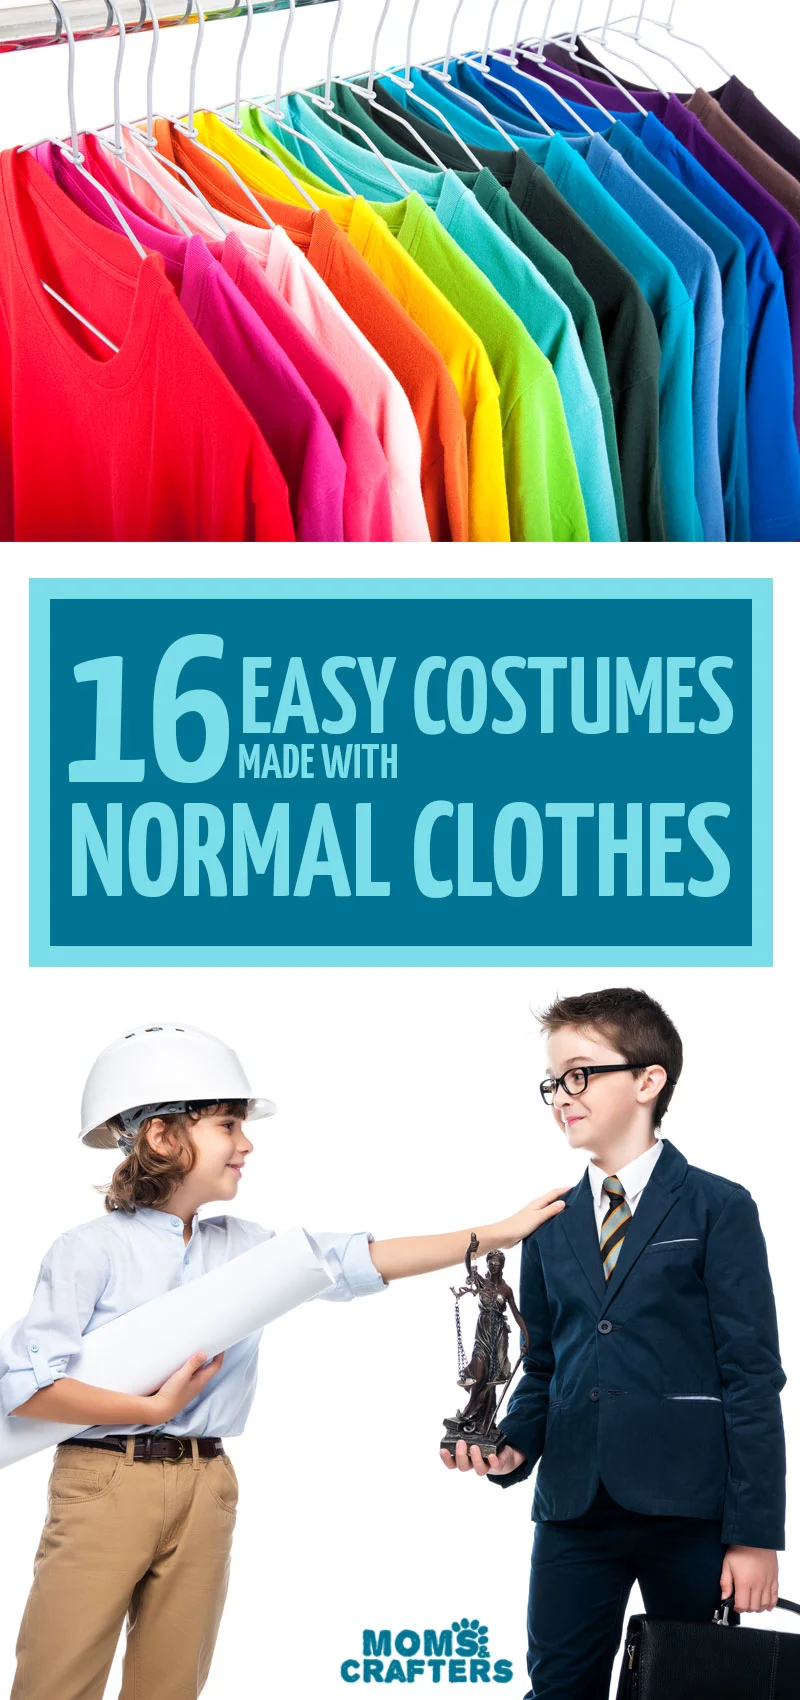 Click how to learn how to make some adorable easy costumes with normal clothes! These DIY costumes for toddlers, babies, preschoolers and kids use real clothing and are so much fun!